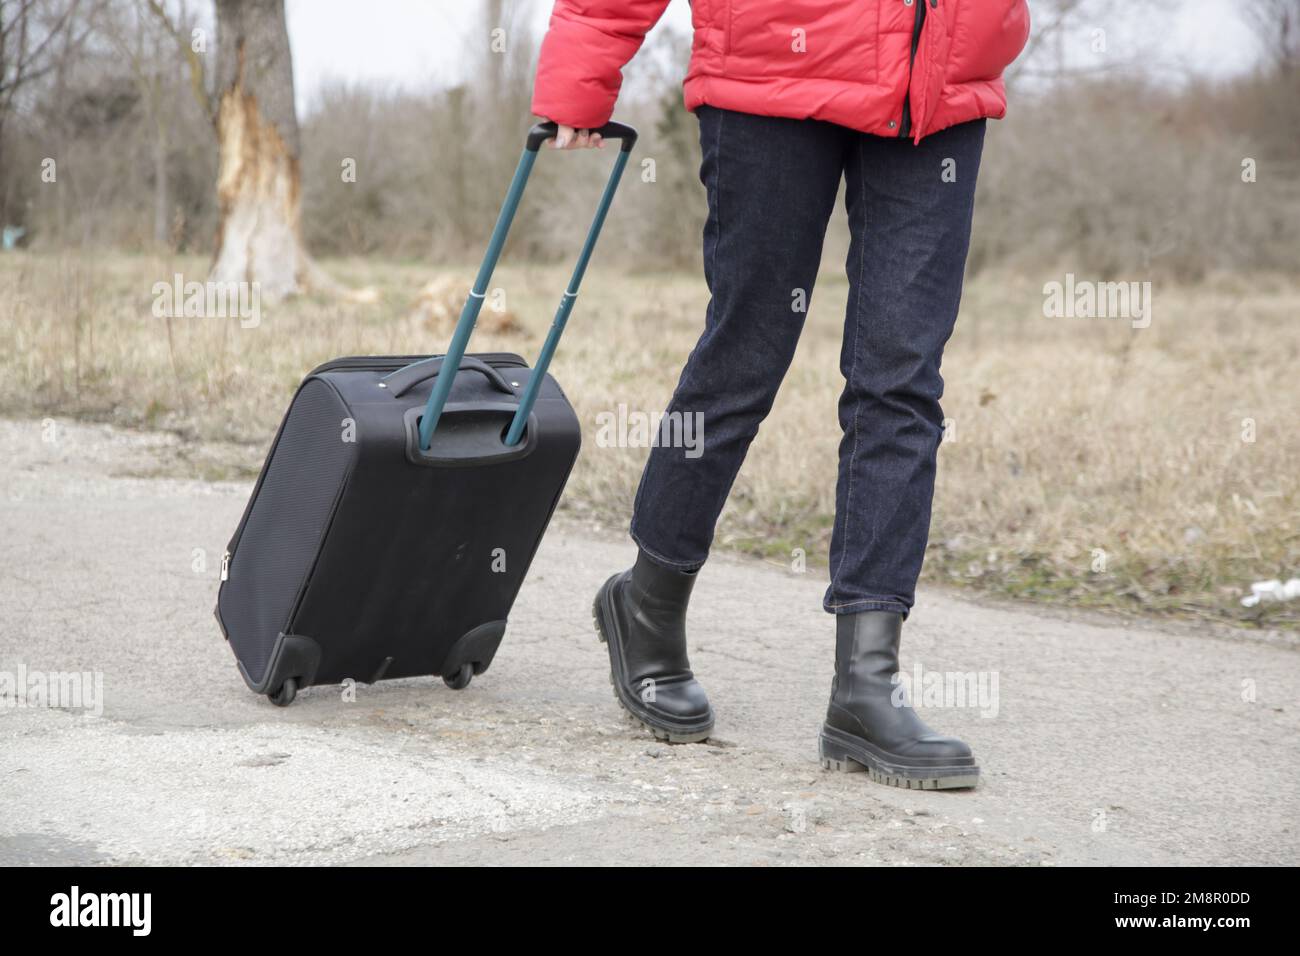 The refugee fleeing the war. Lives in a suitcase. Refugees, war crisis, humanitarian disaster concept. Stock Photo